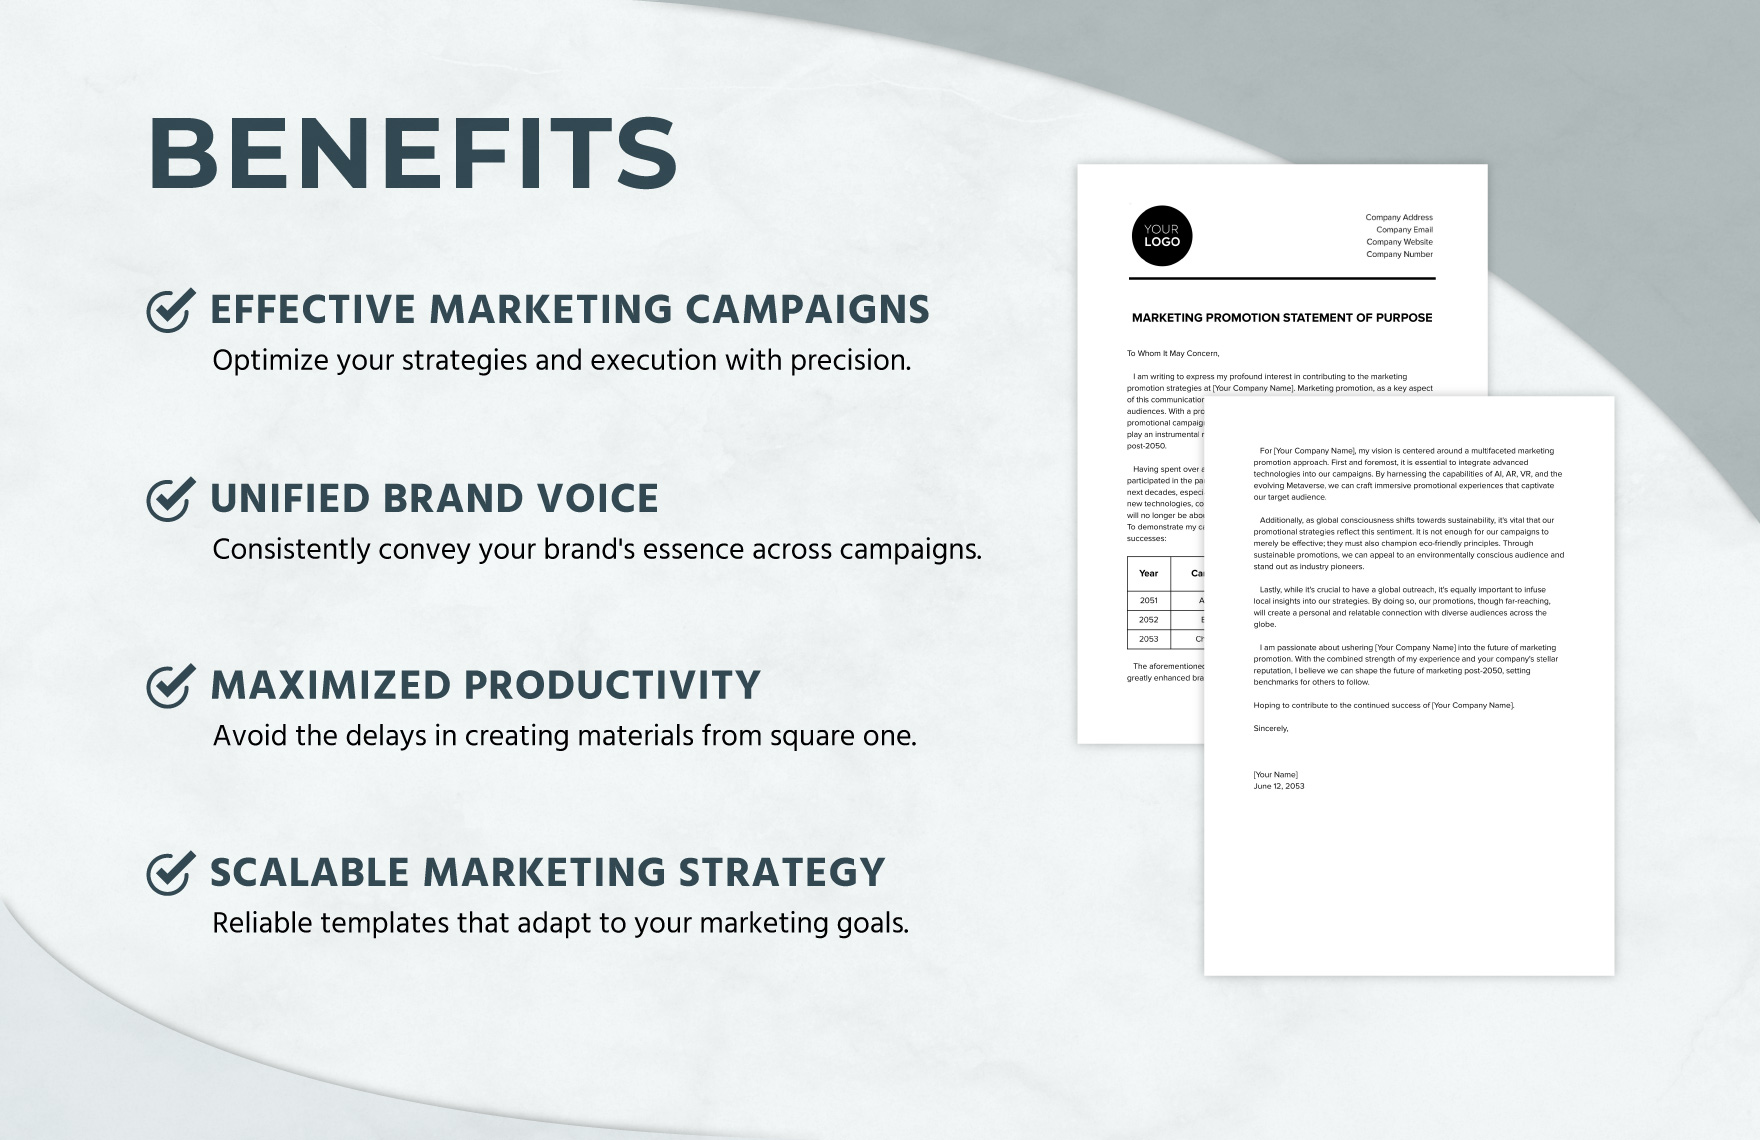 Marketing Promotion Statement of Purpose Template